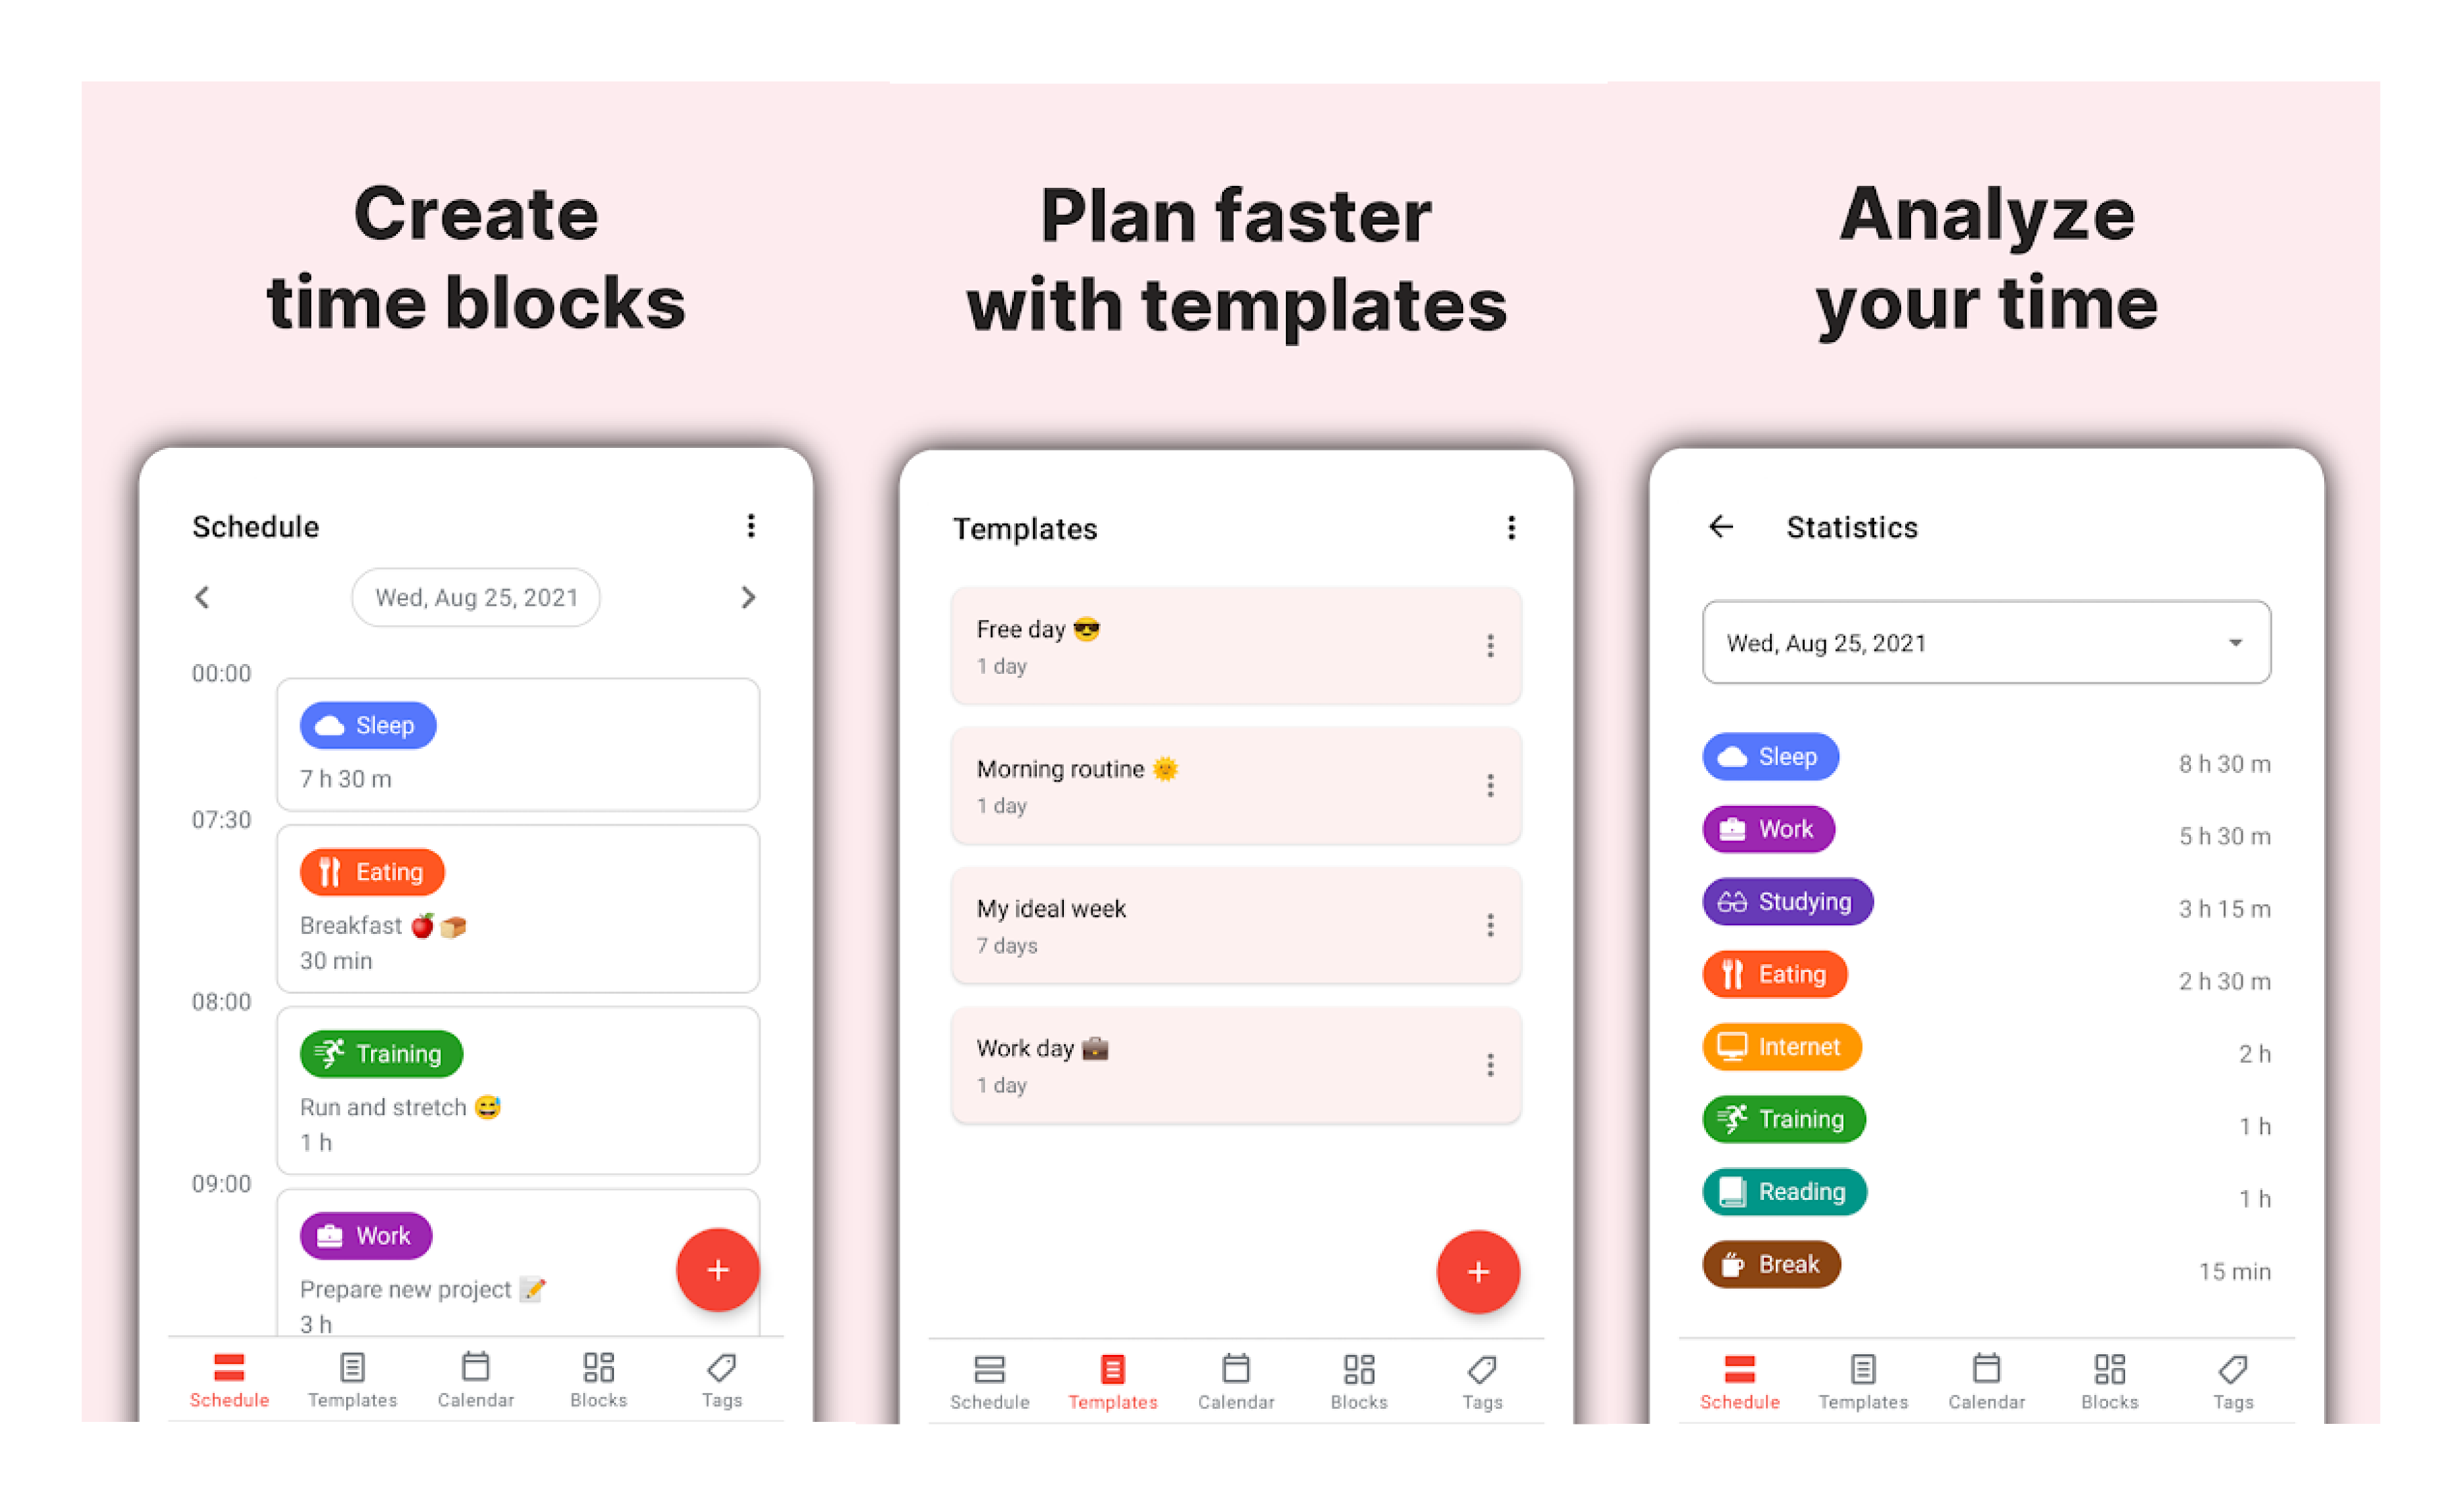 15 Popular Productivity Apps That Will Get You Organized and Save You Time